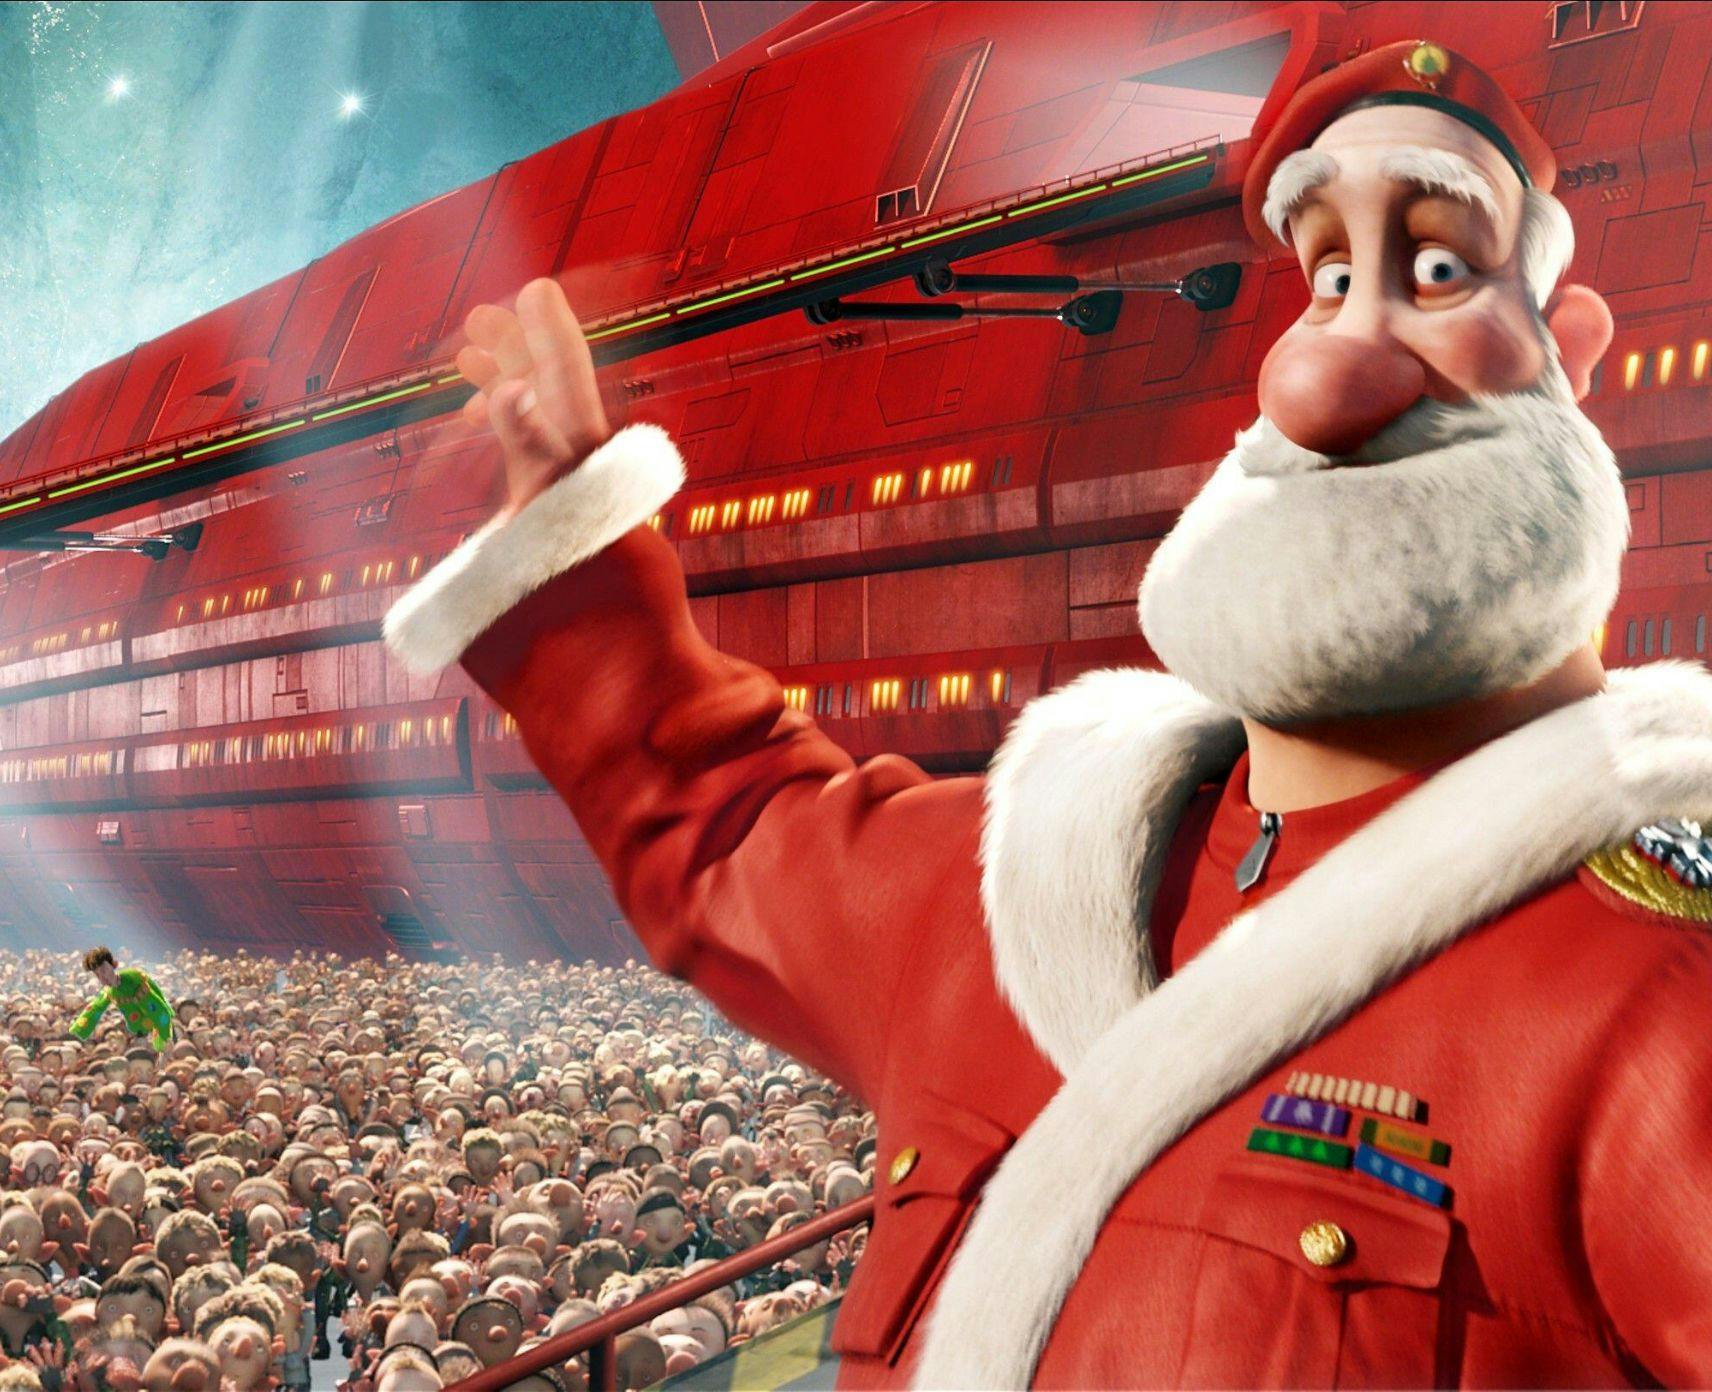 Santa Claus stands in front of a giant red space ship, with his army of elves behind him.